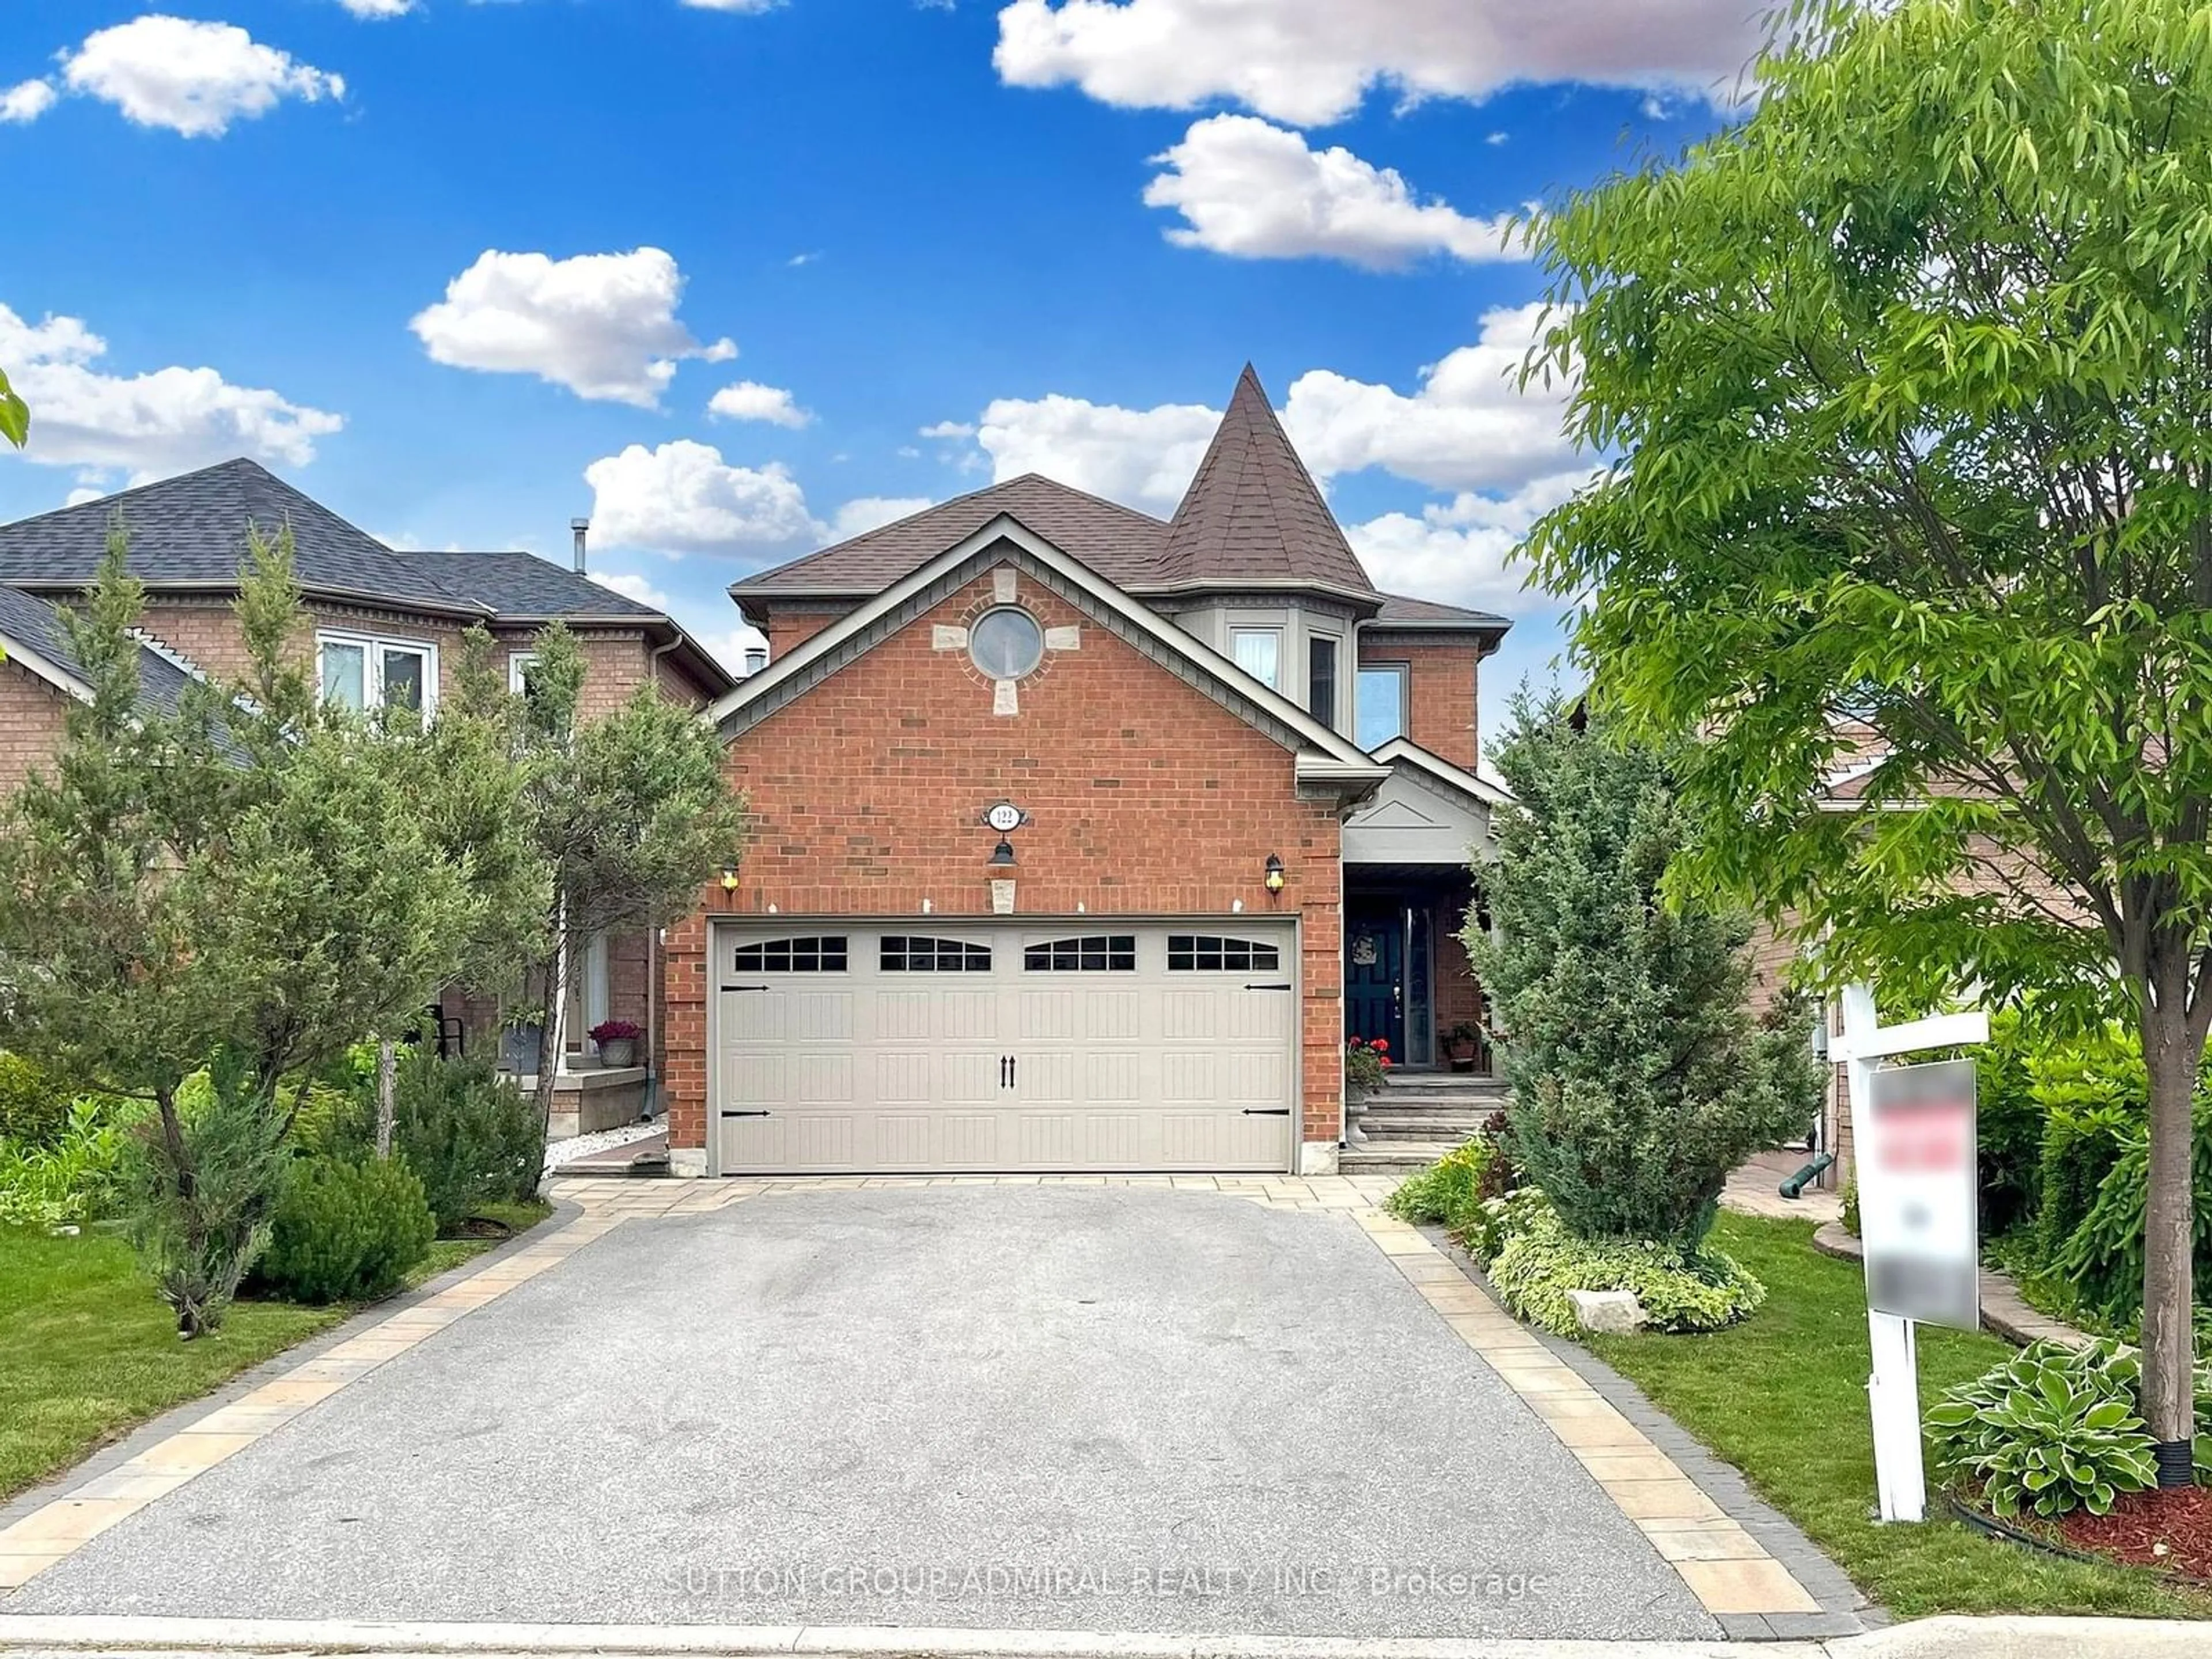 Home with brick exterior material for 122 Redondo Dr, Vaughan Ontario L4J 7S5